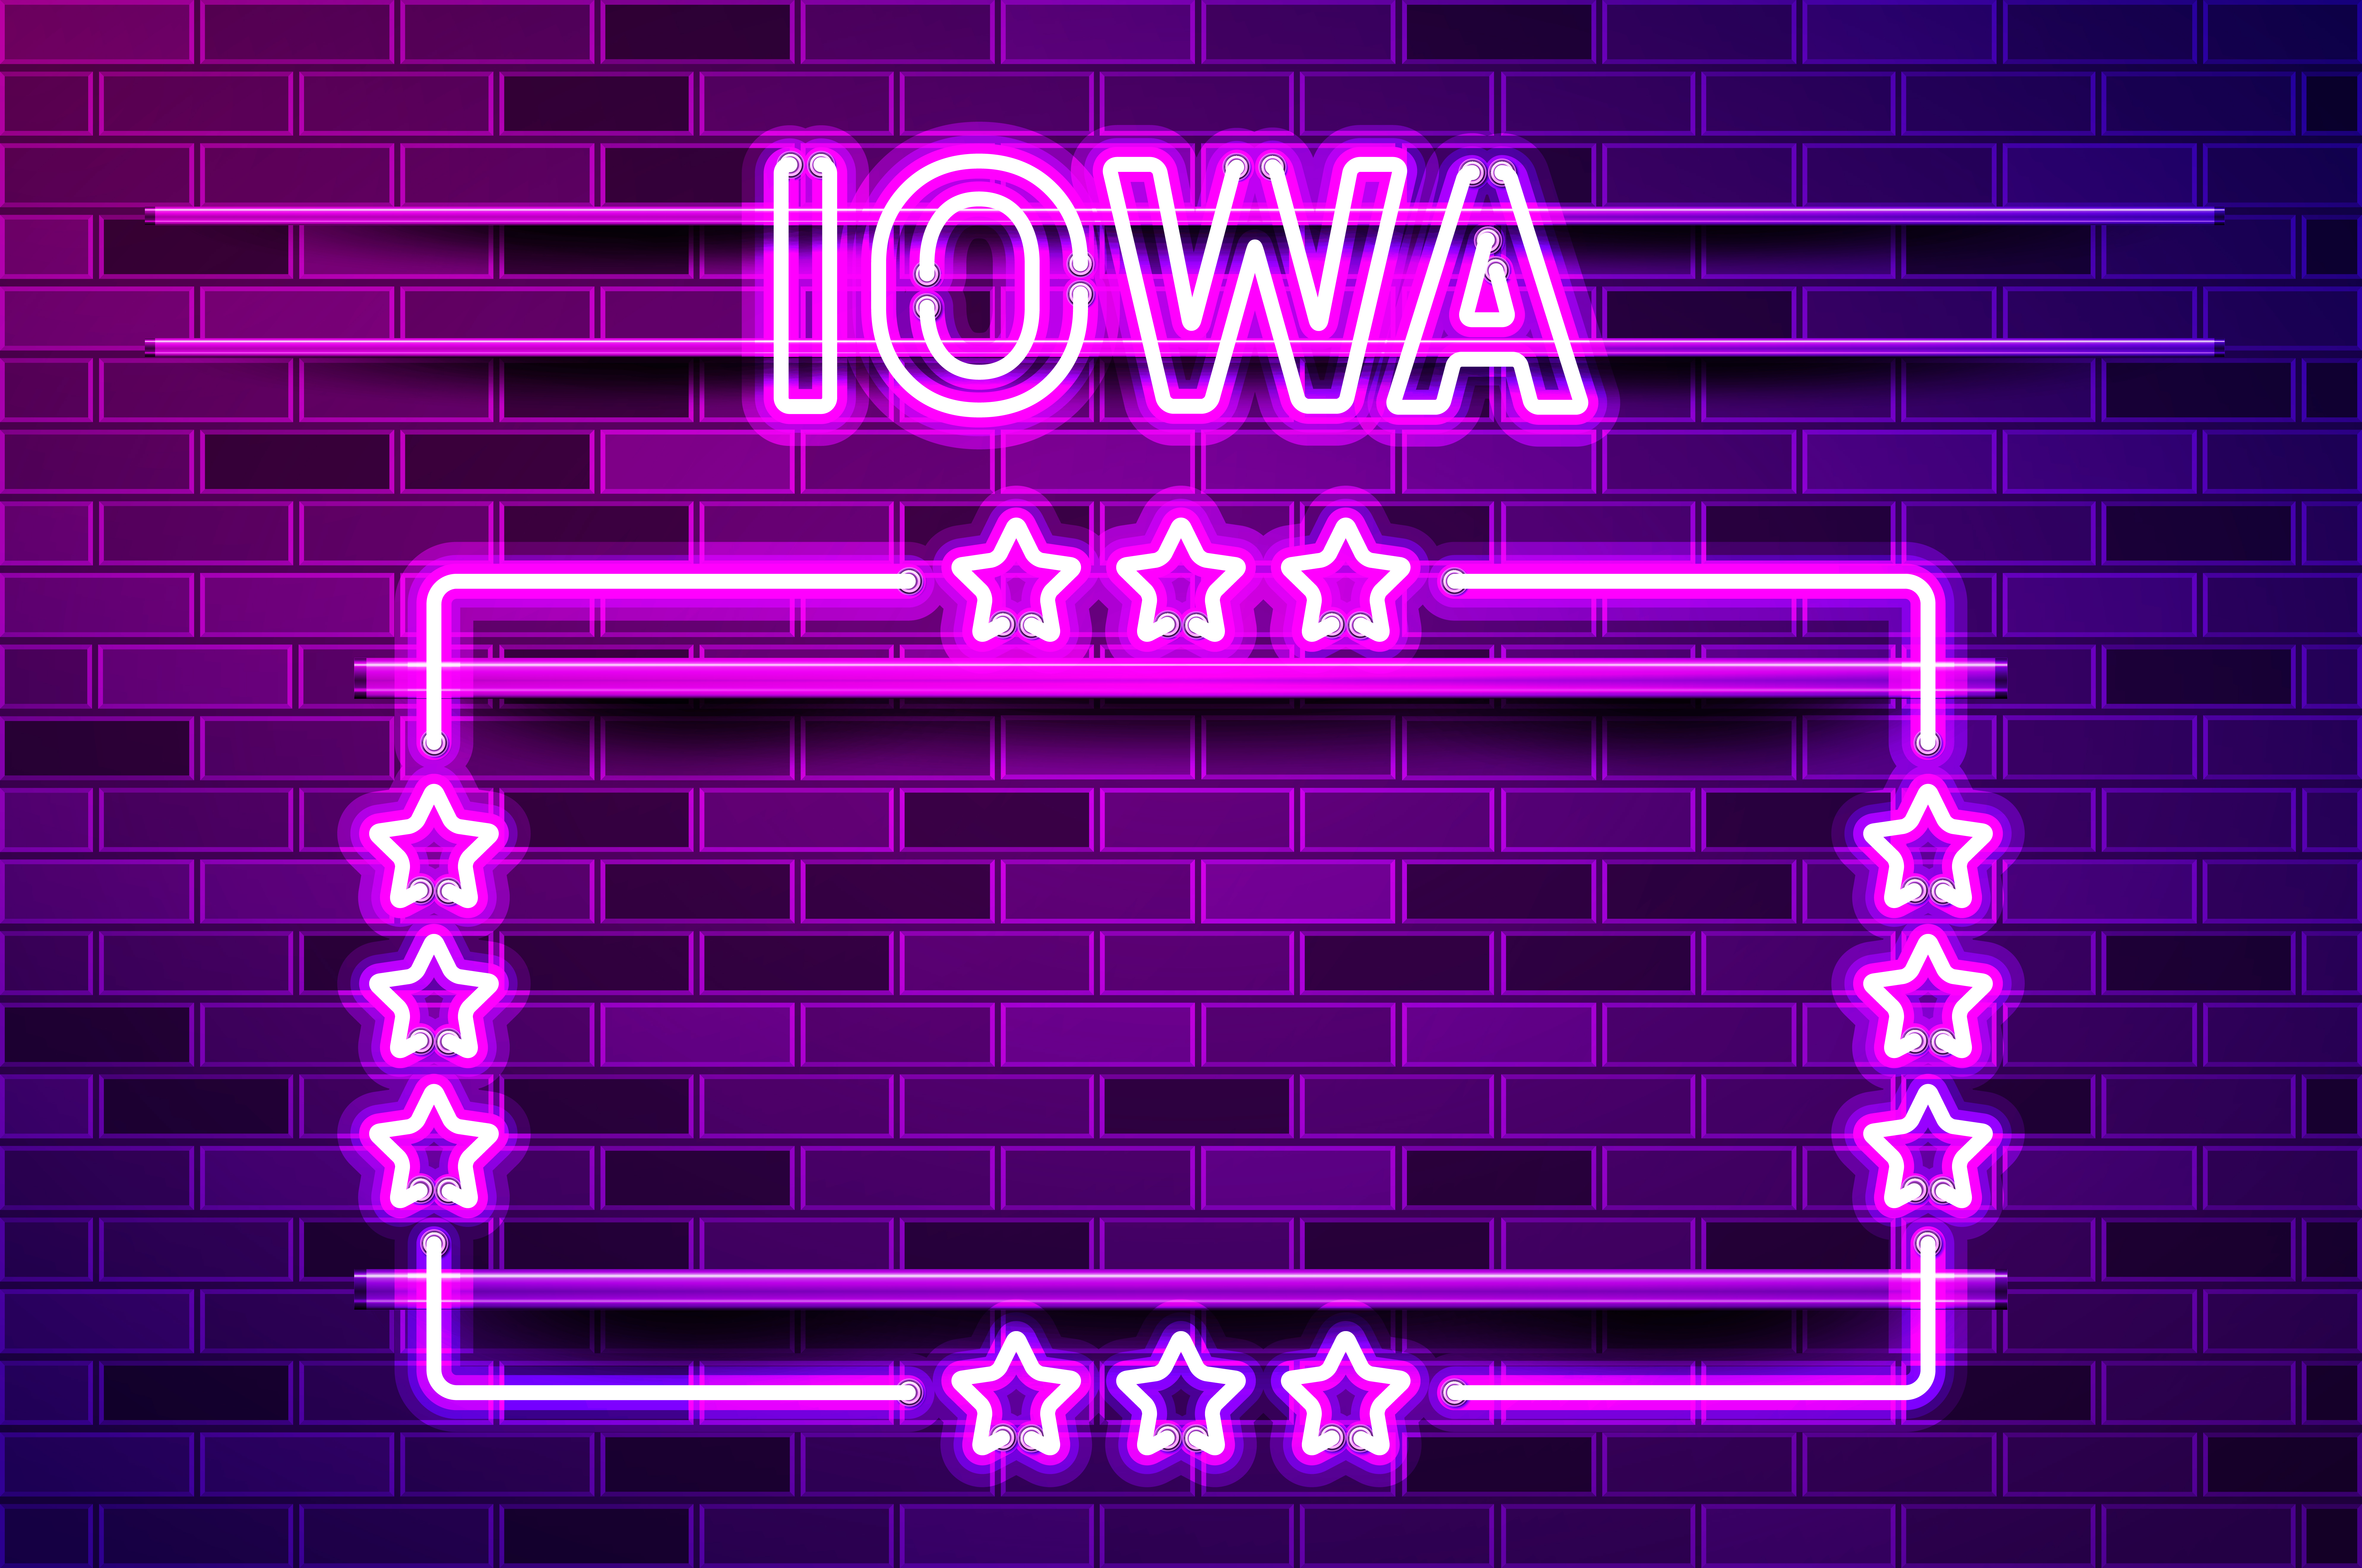 Iowa US State glowing purple neon lettering and a rectangular frame with stars. Realistic vector illustration. Purple brick wall, violet glow, metal holders.. Iowa US State glowing purple neon lettering and a rectangular frame with stars